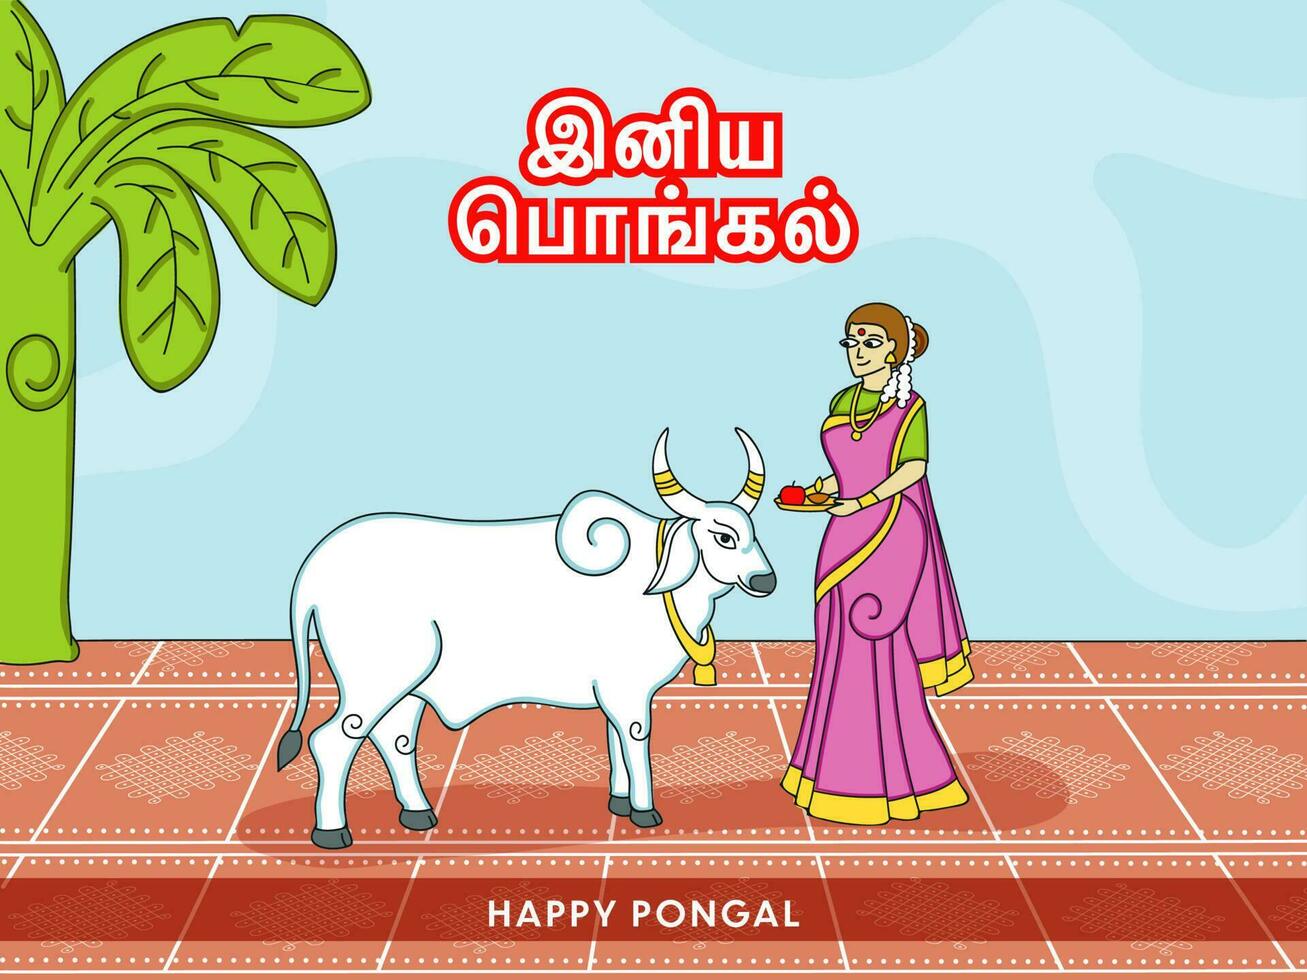 Cartoon South Indian Woman Worshiping Bull On The Occasion Of Pongal Festival. vector